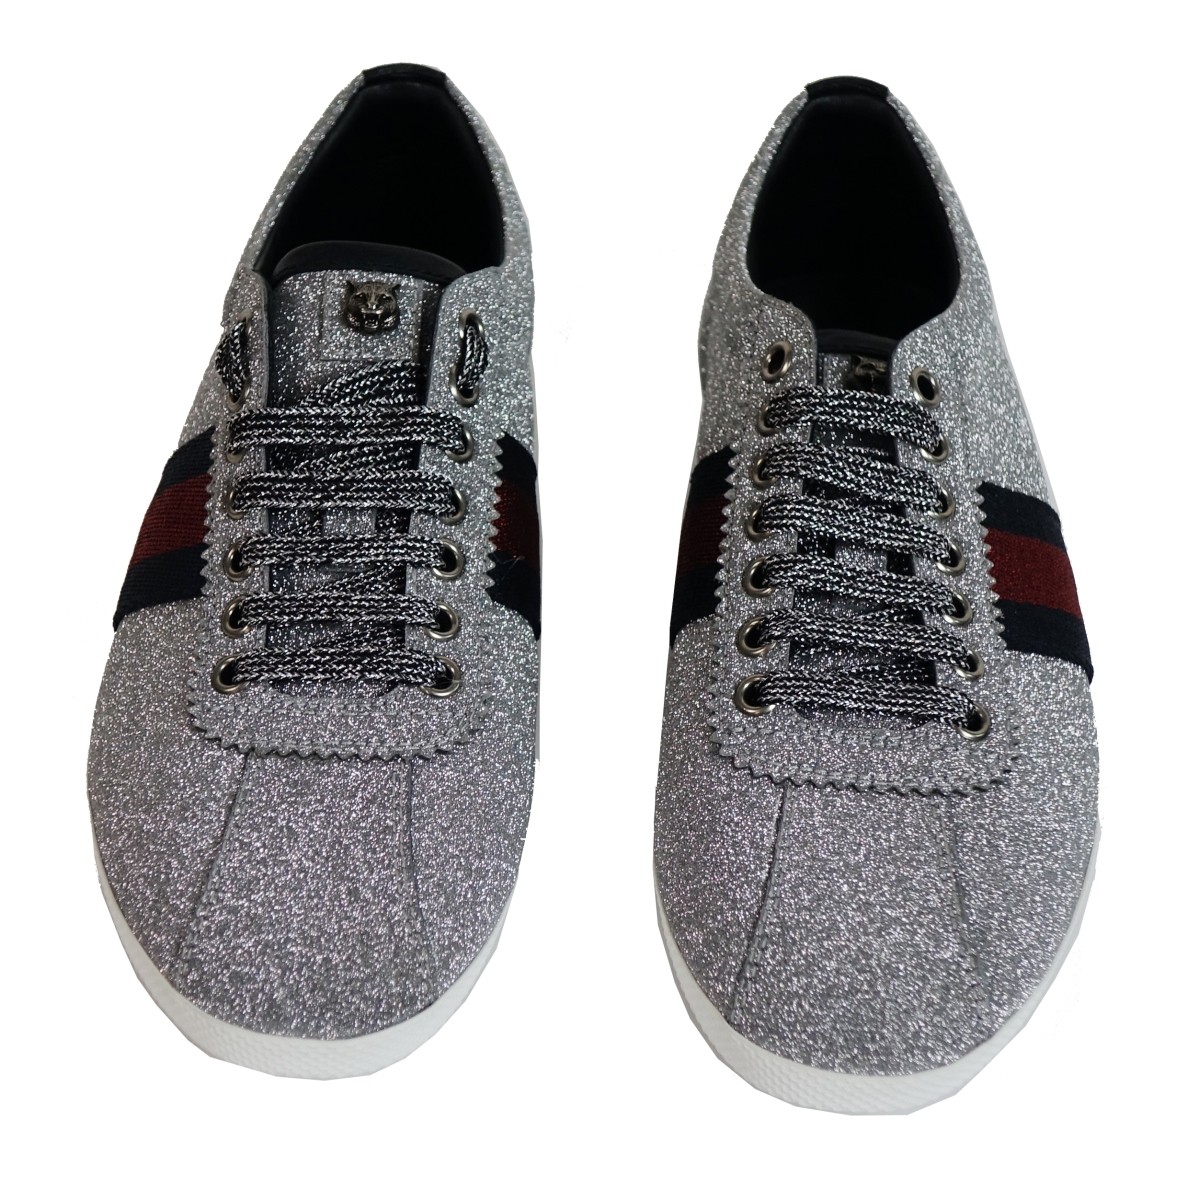 Gucci Glitter Web Sneakers with Studs